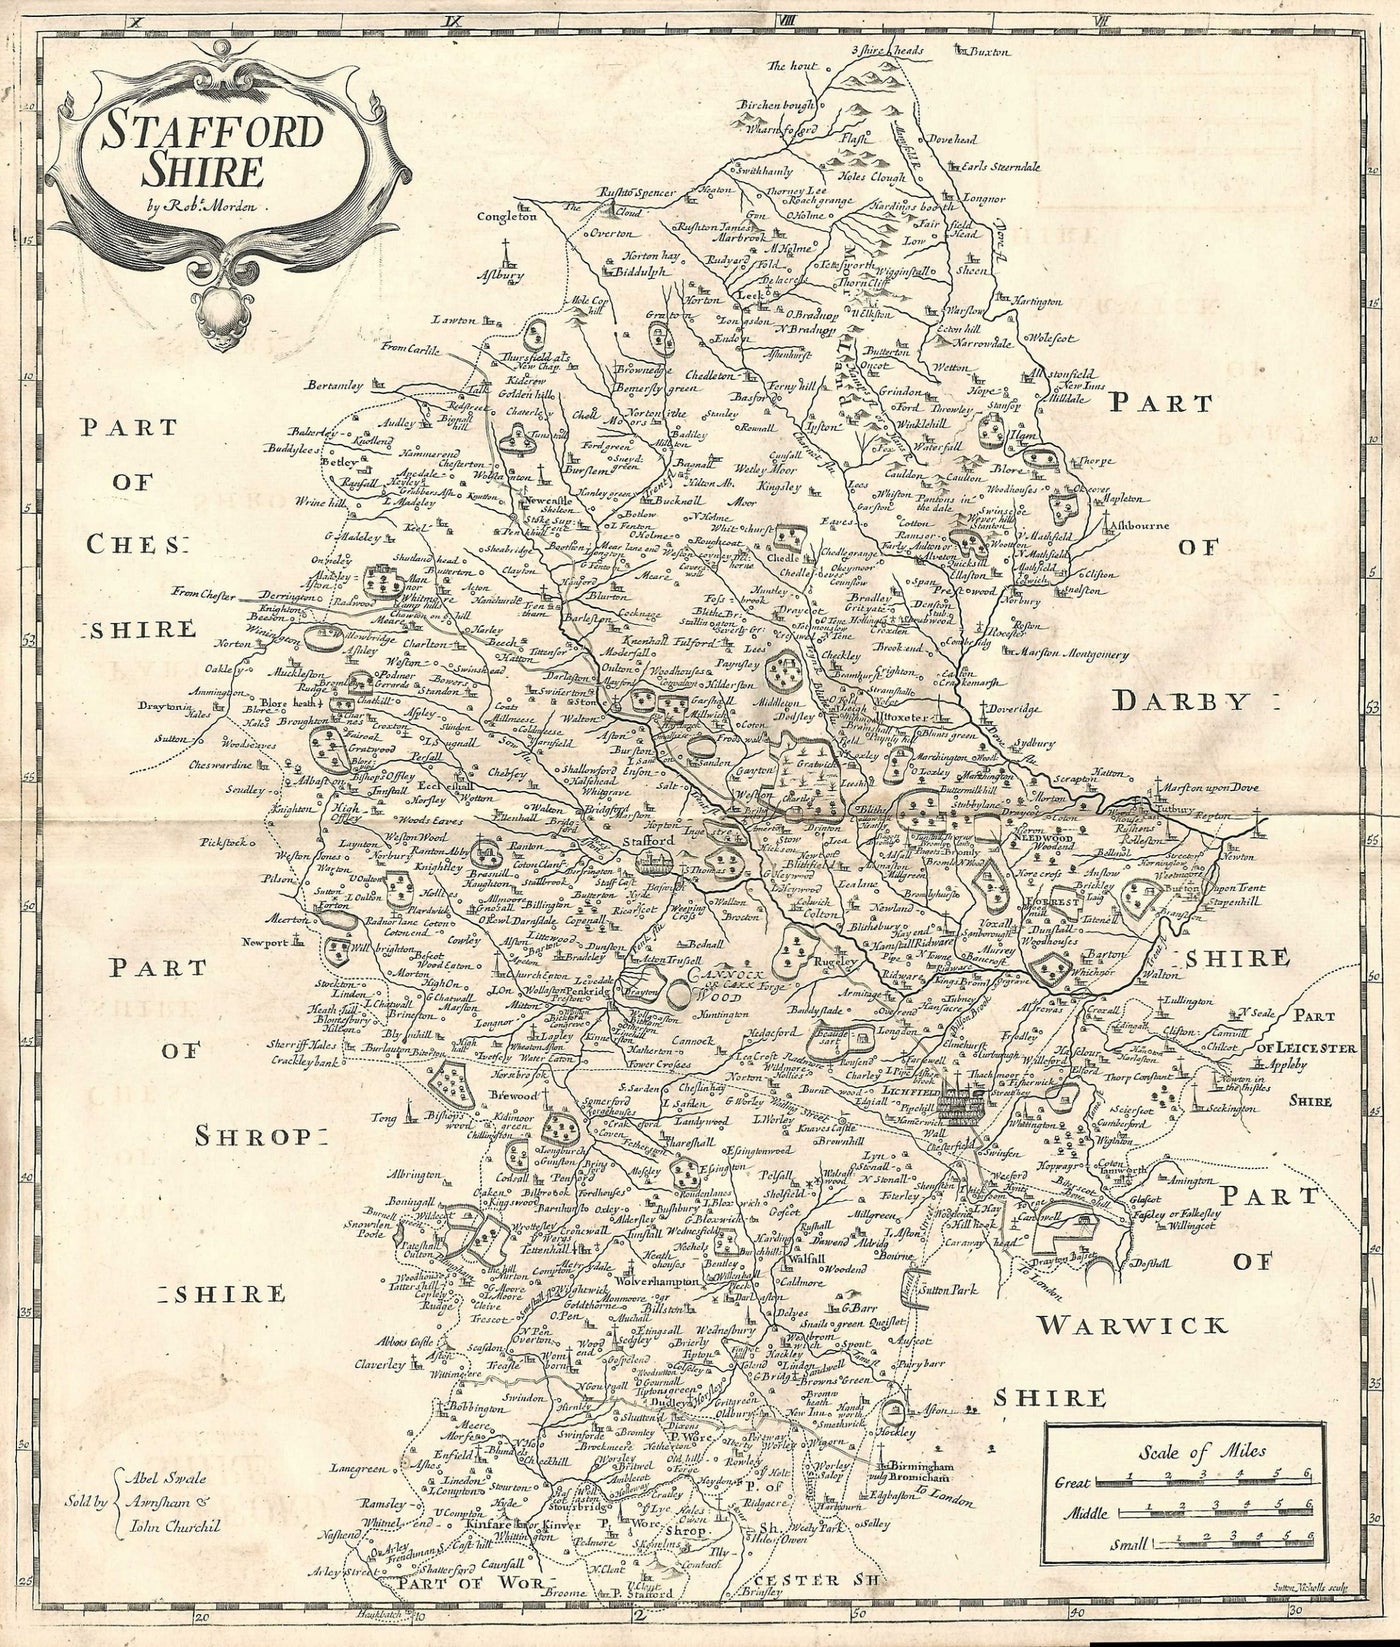 Staffordshire antique map by Robert Morden 1753